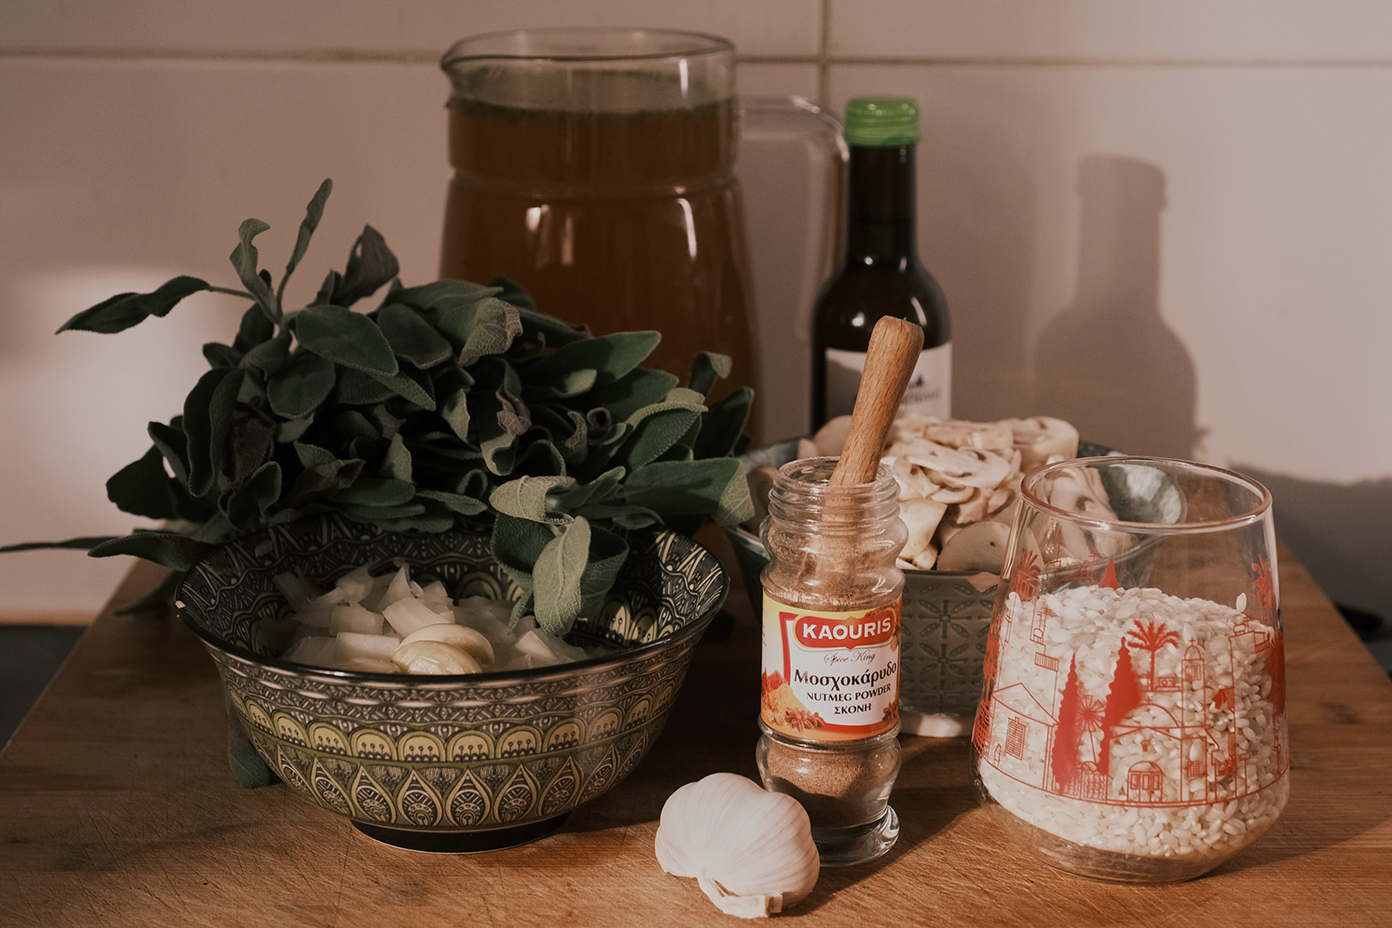 Cooking preparation scene with fresh ingredients laid out on a wooden kitchen surface. Visible are a bowl of chopped onions and whole sage leaves, a jar of honey, a bottle of balsamic vinegar, a glass jar of arborio rice with a red patterned design, a head of garlic, and a jar of ground nutmeg with a red label.